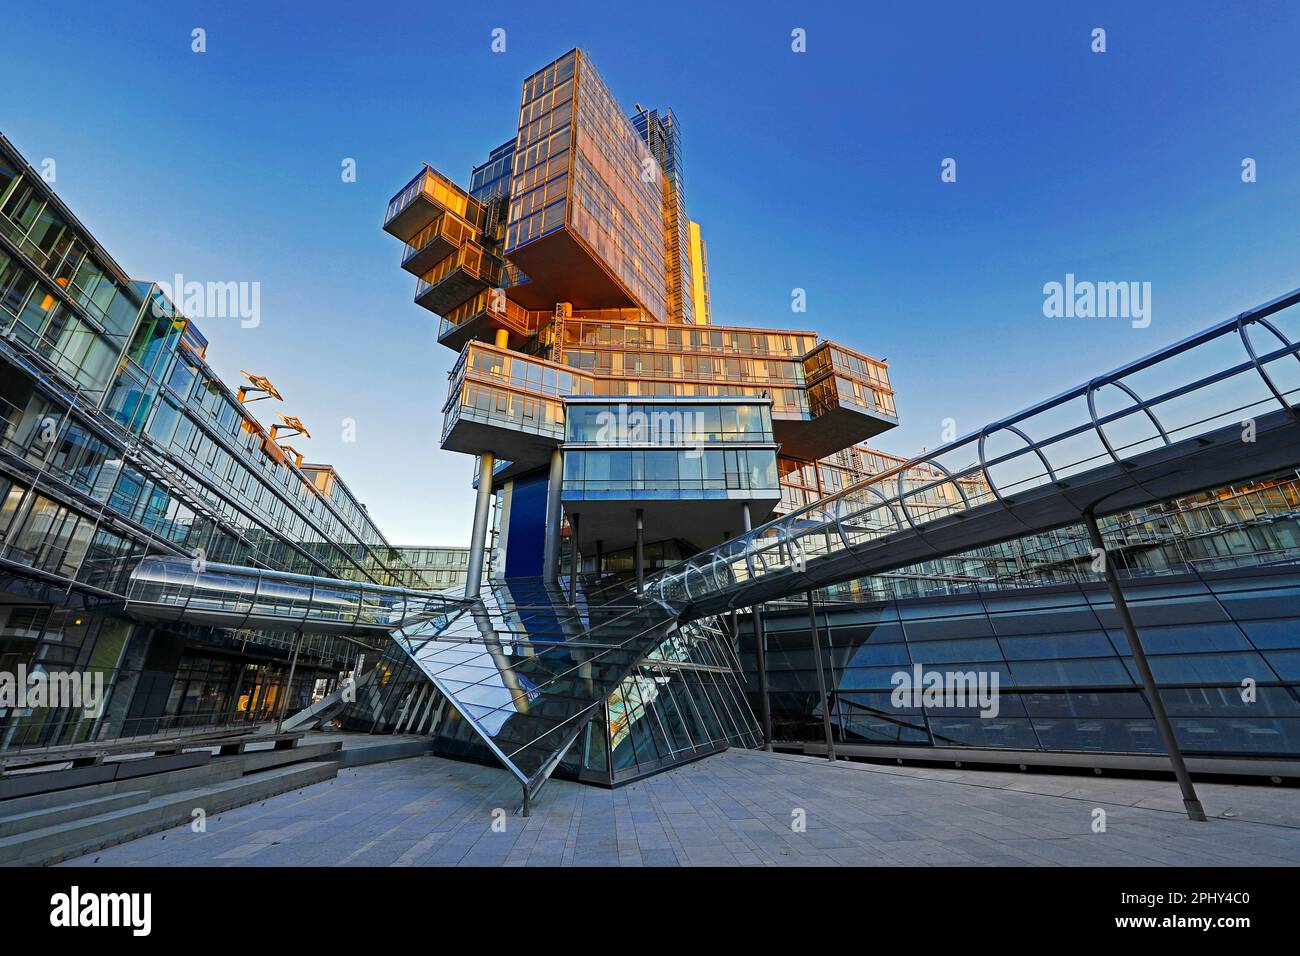 administration building Nord/LB, Norddeutsche Landesbank, Germany, Lower Saxony, Hanover Stock Photo